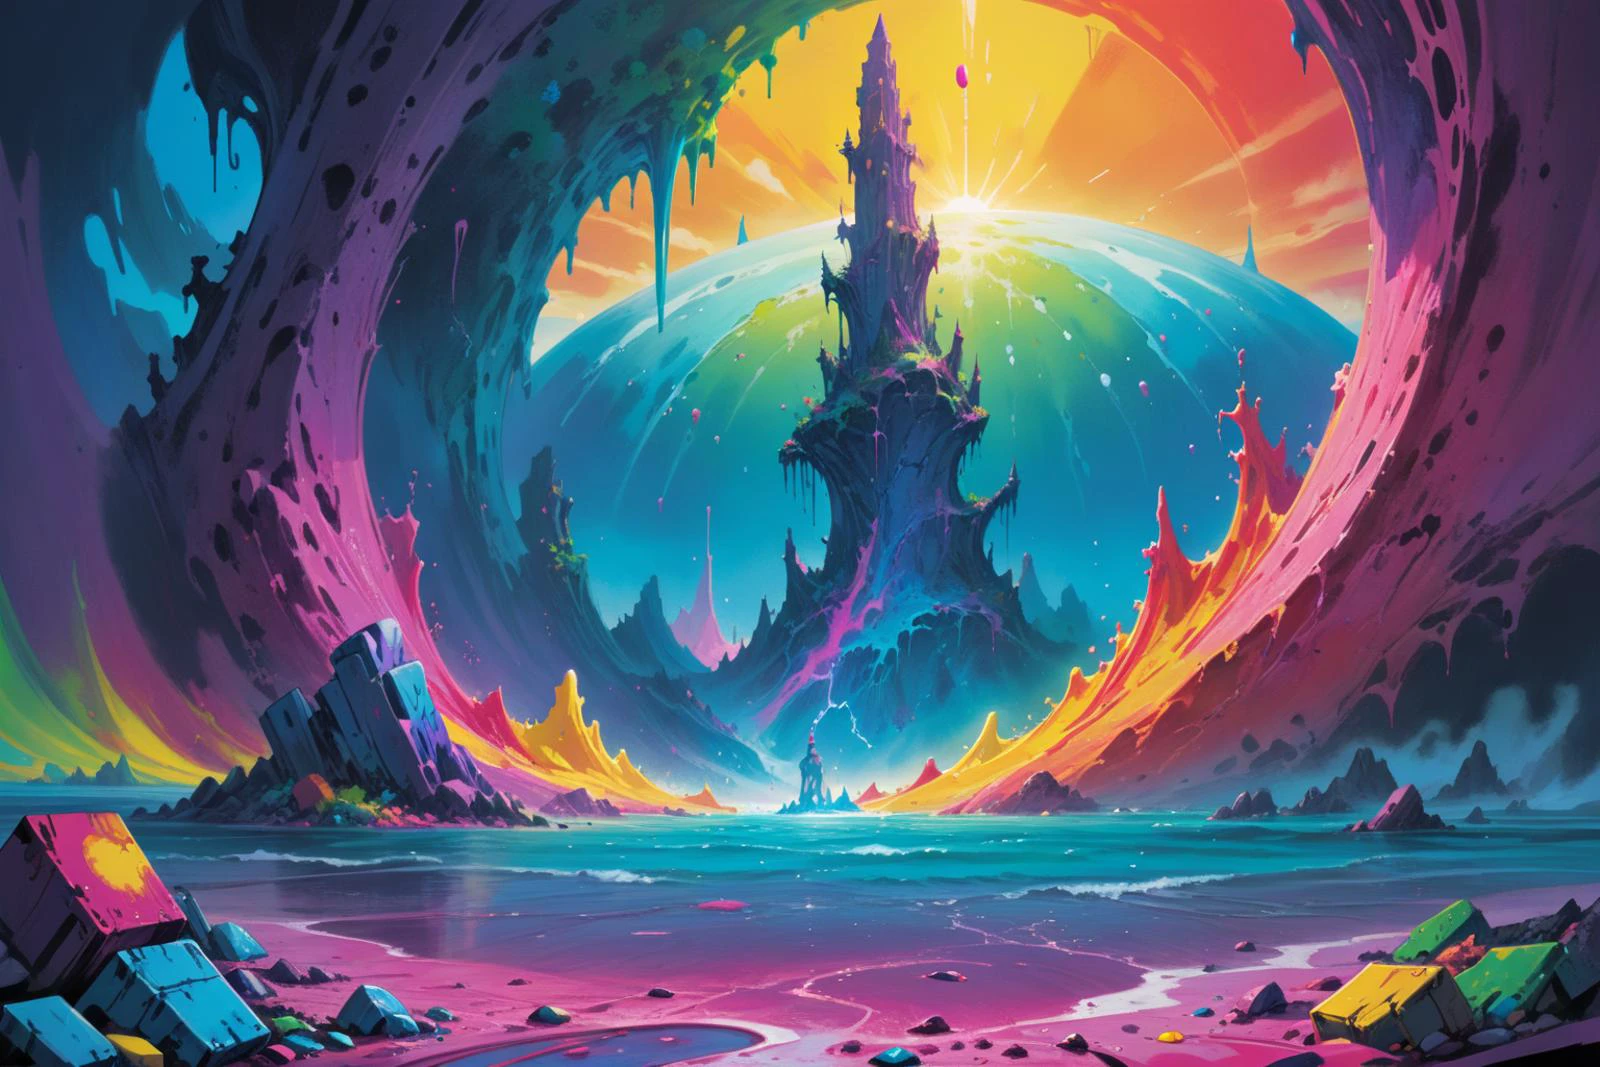 masterpiece, painted world,  colorful splashes, from the game Dead level, created by Chris Ditko and Lisa Frank and Simon Stalenhag